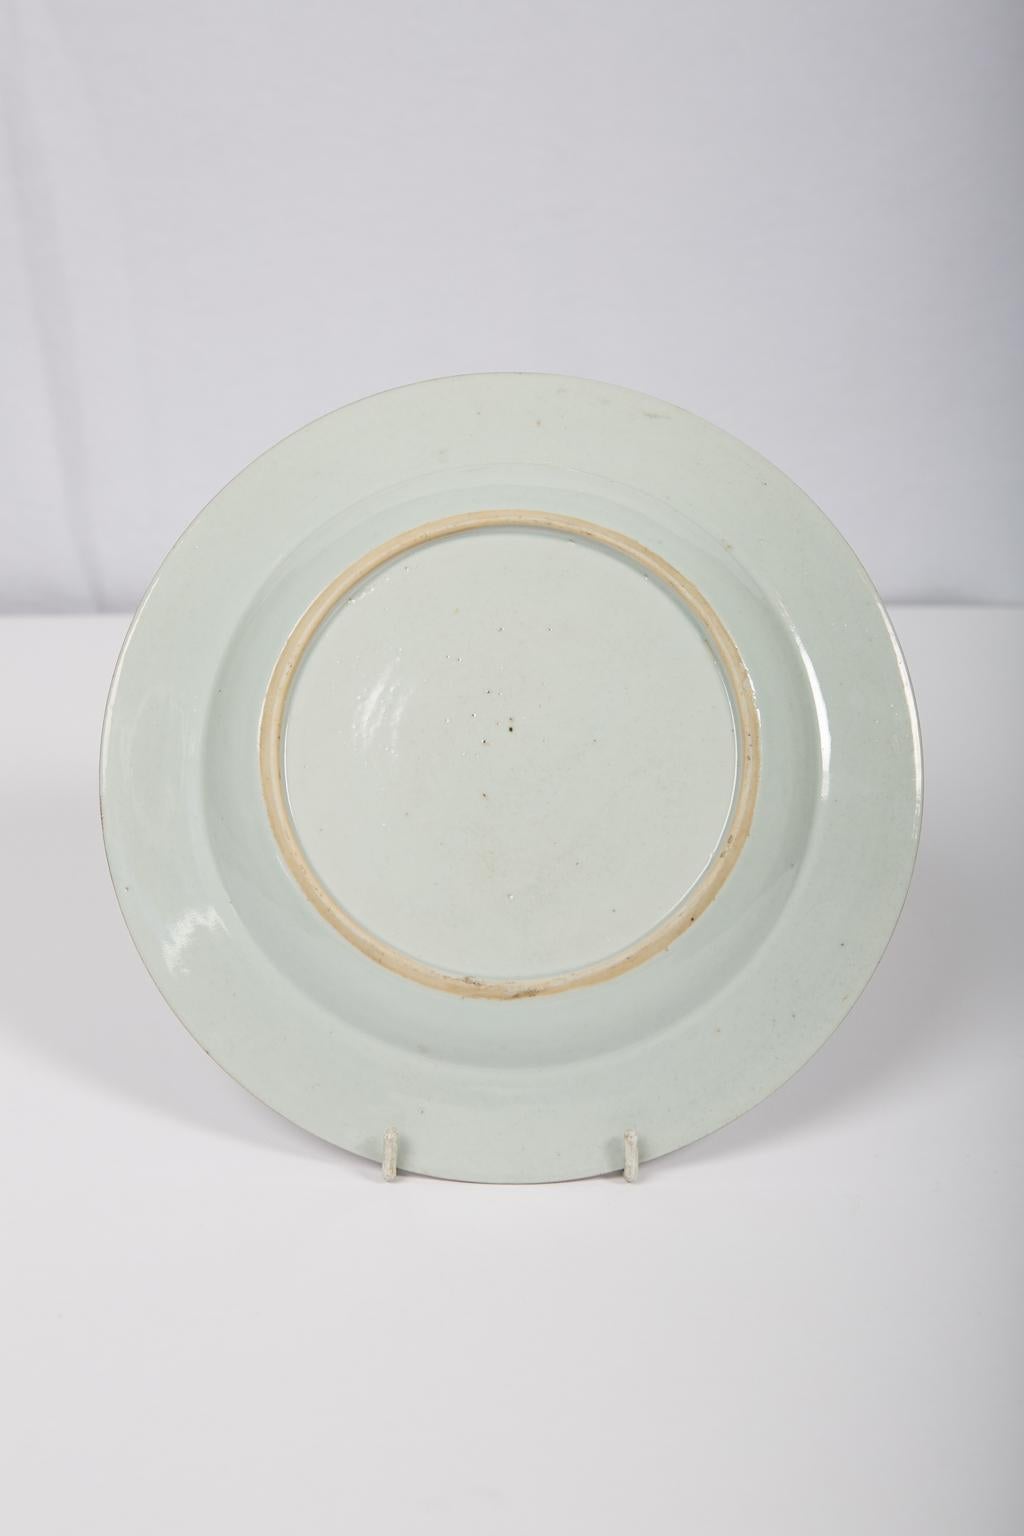 Chinese Export Porcelain Plate Judgement of Paris Made Circa 1750 For Sale 1